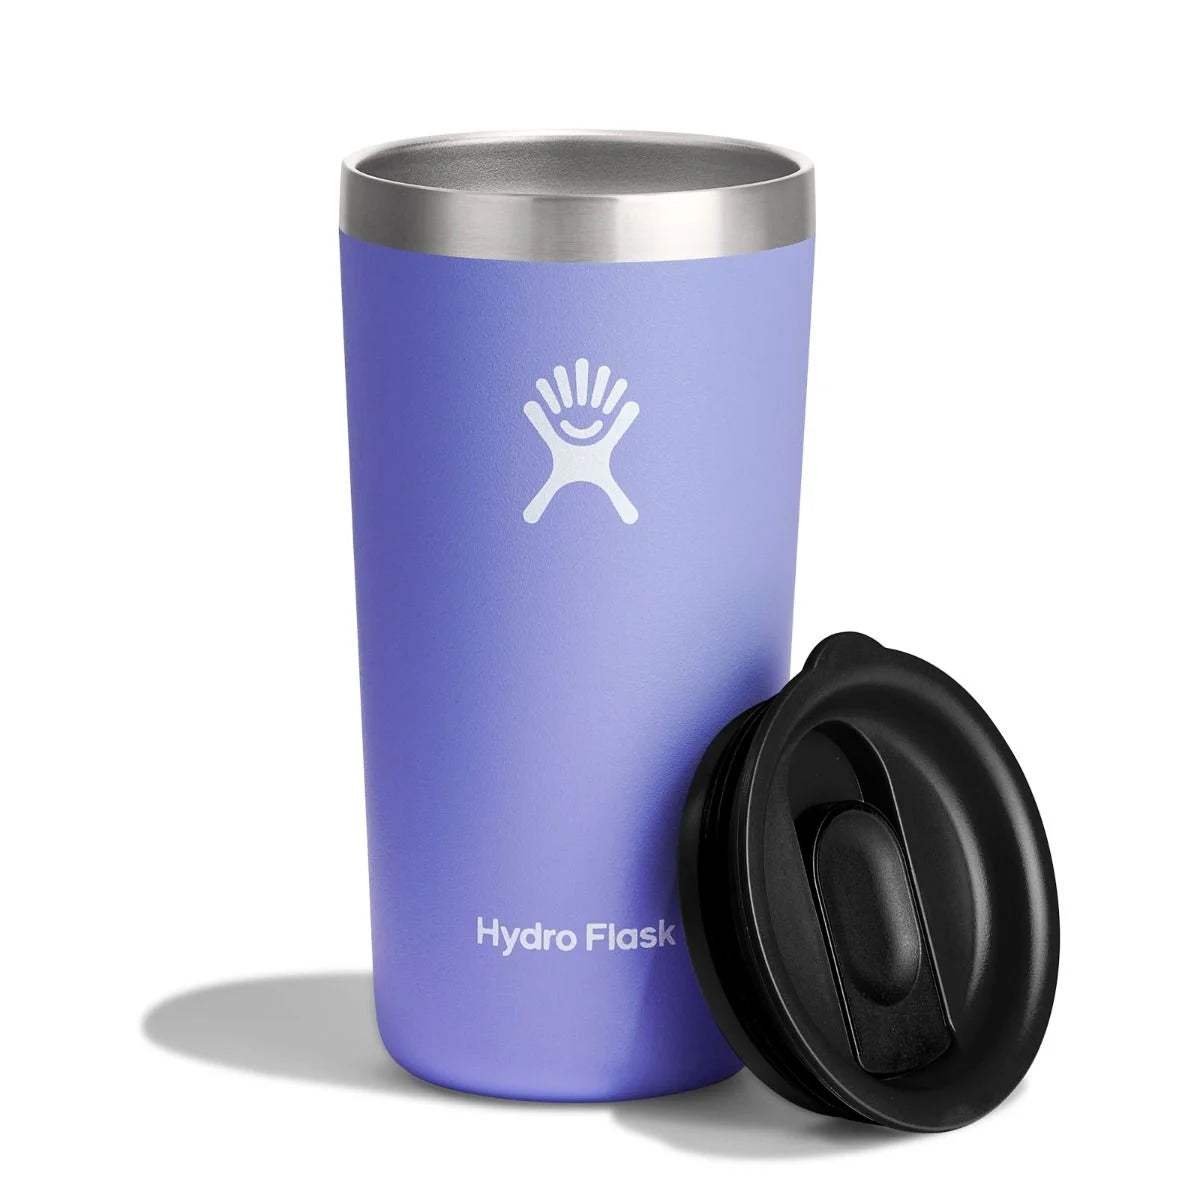 Hydro Flask 12oz Tumbler - The Luxury Promotional Gifts Company Limited